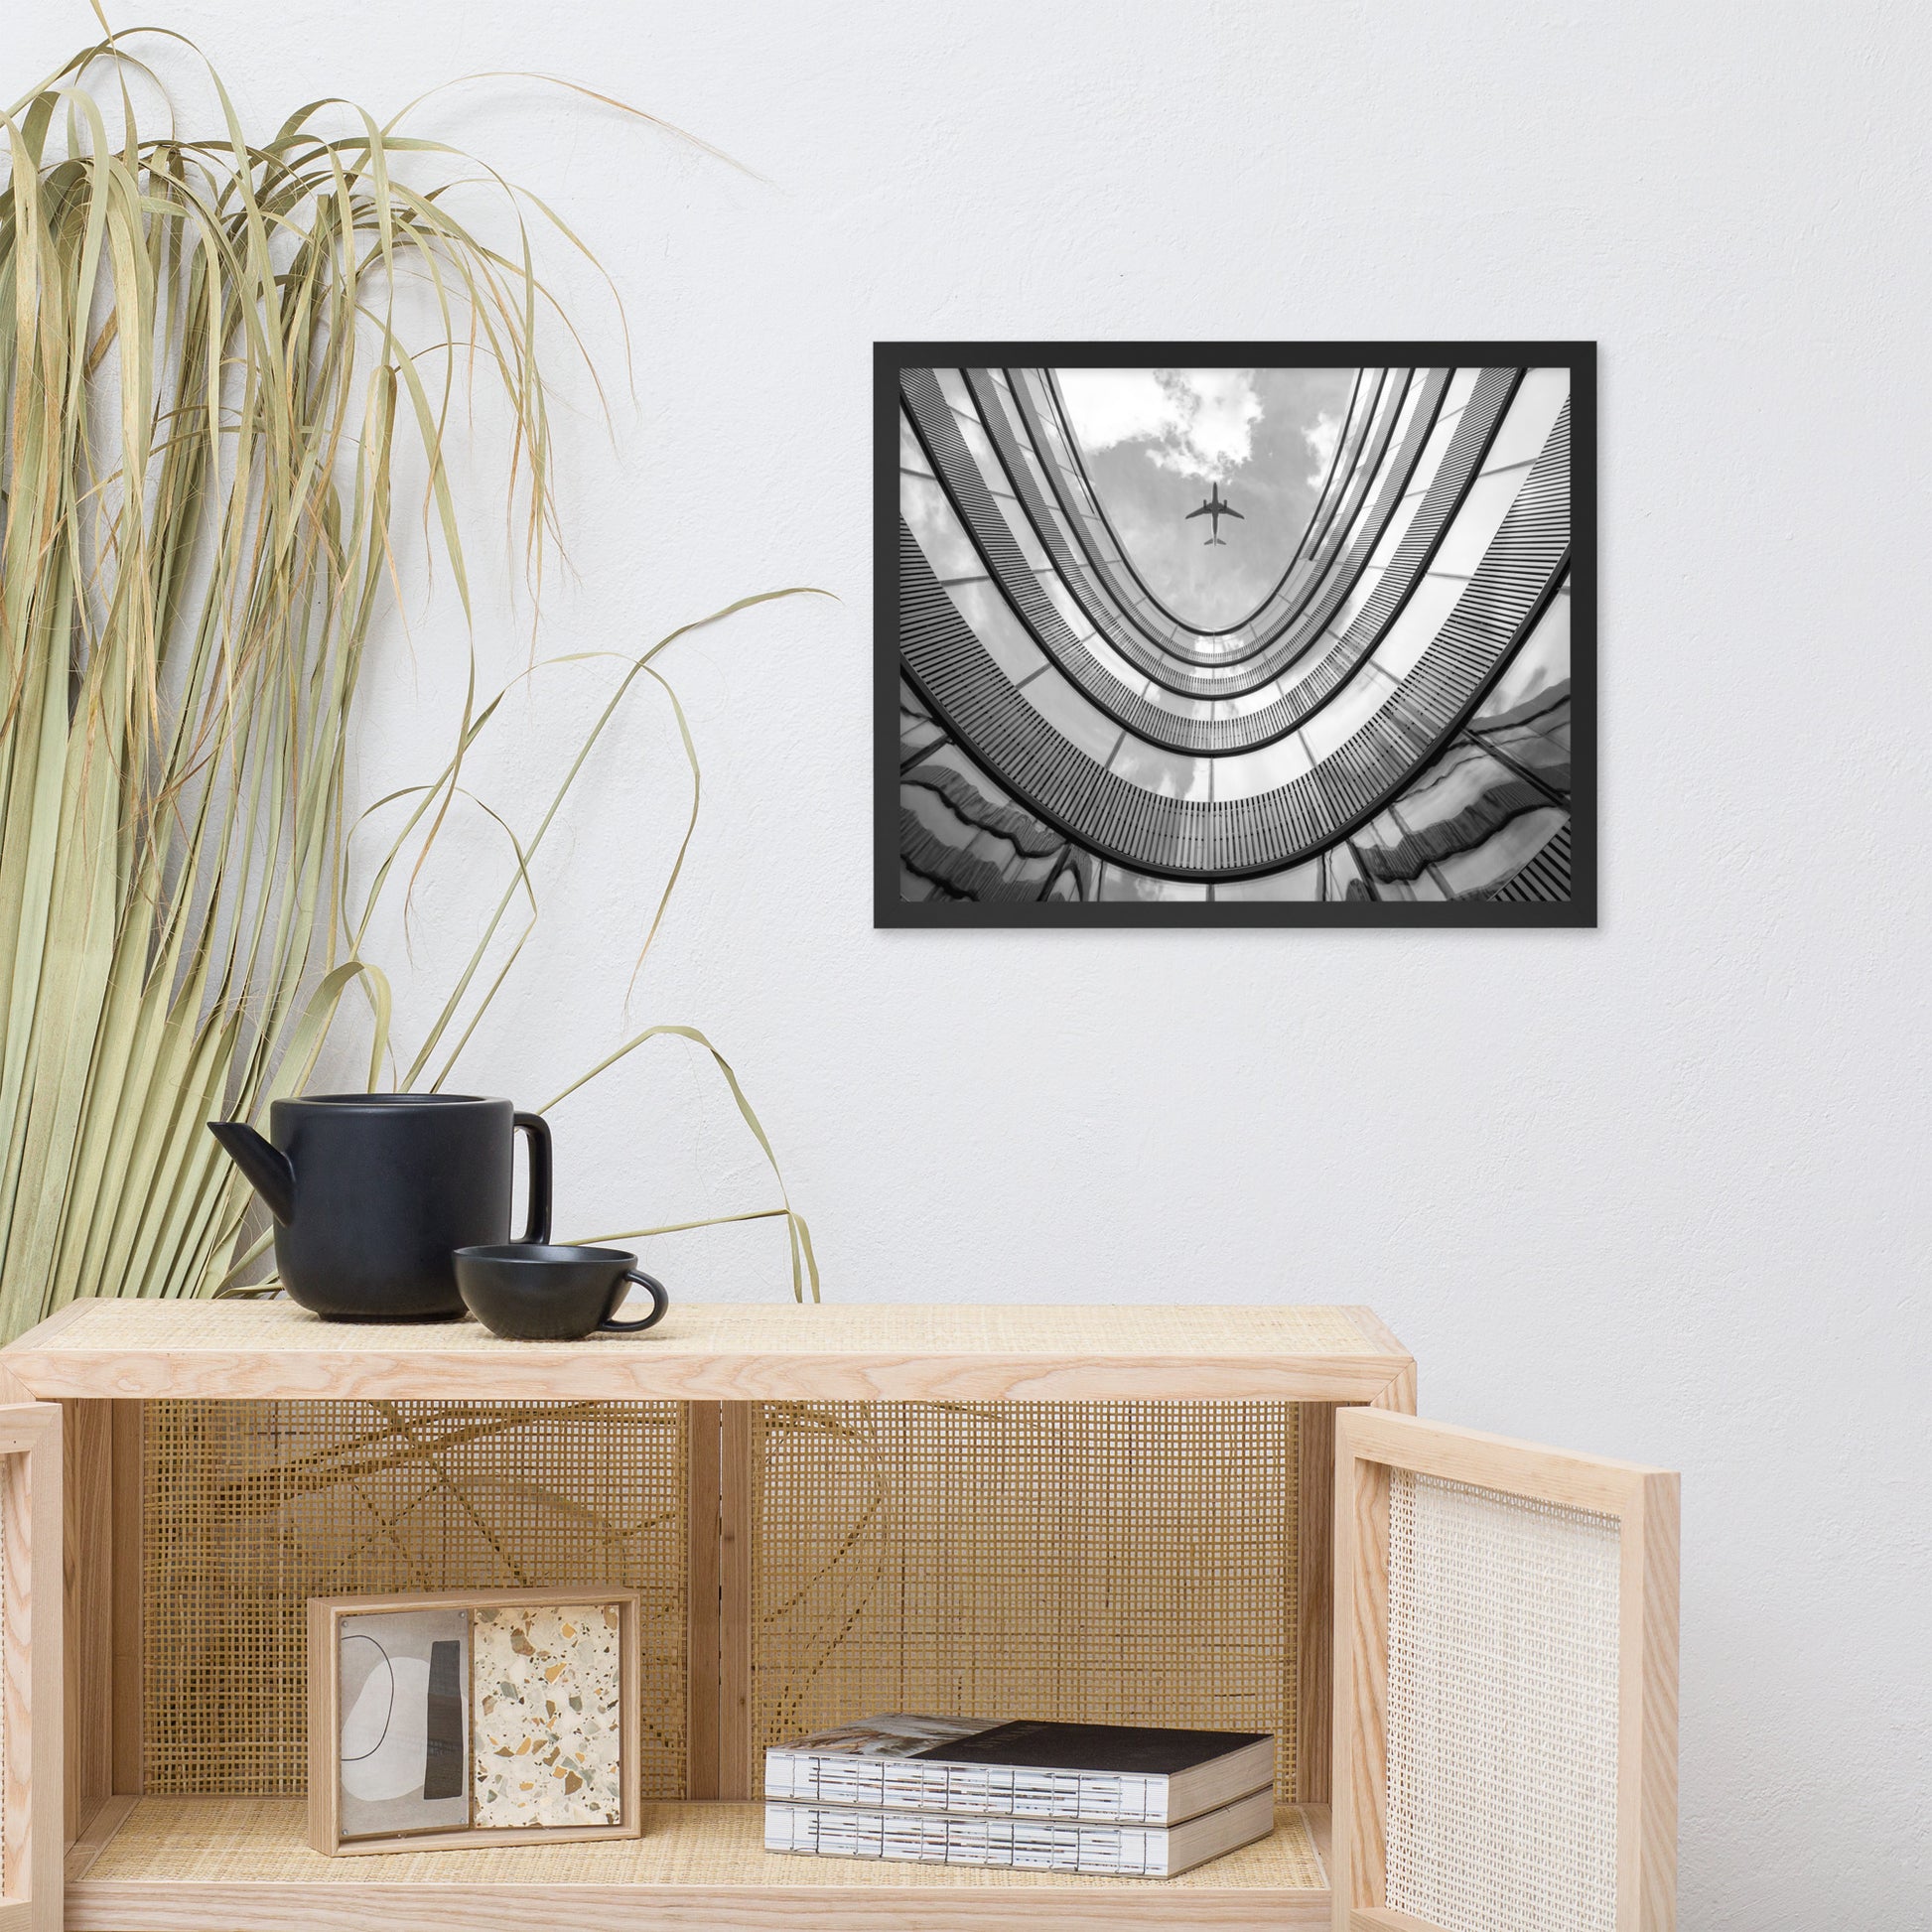 Urban Intersections in the Sky Architectural Photograph Framed Wall Art Print